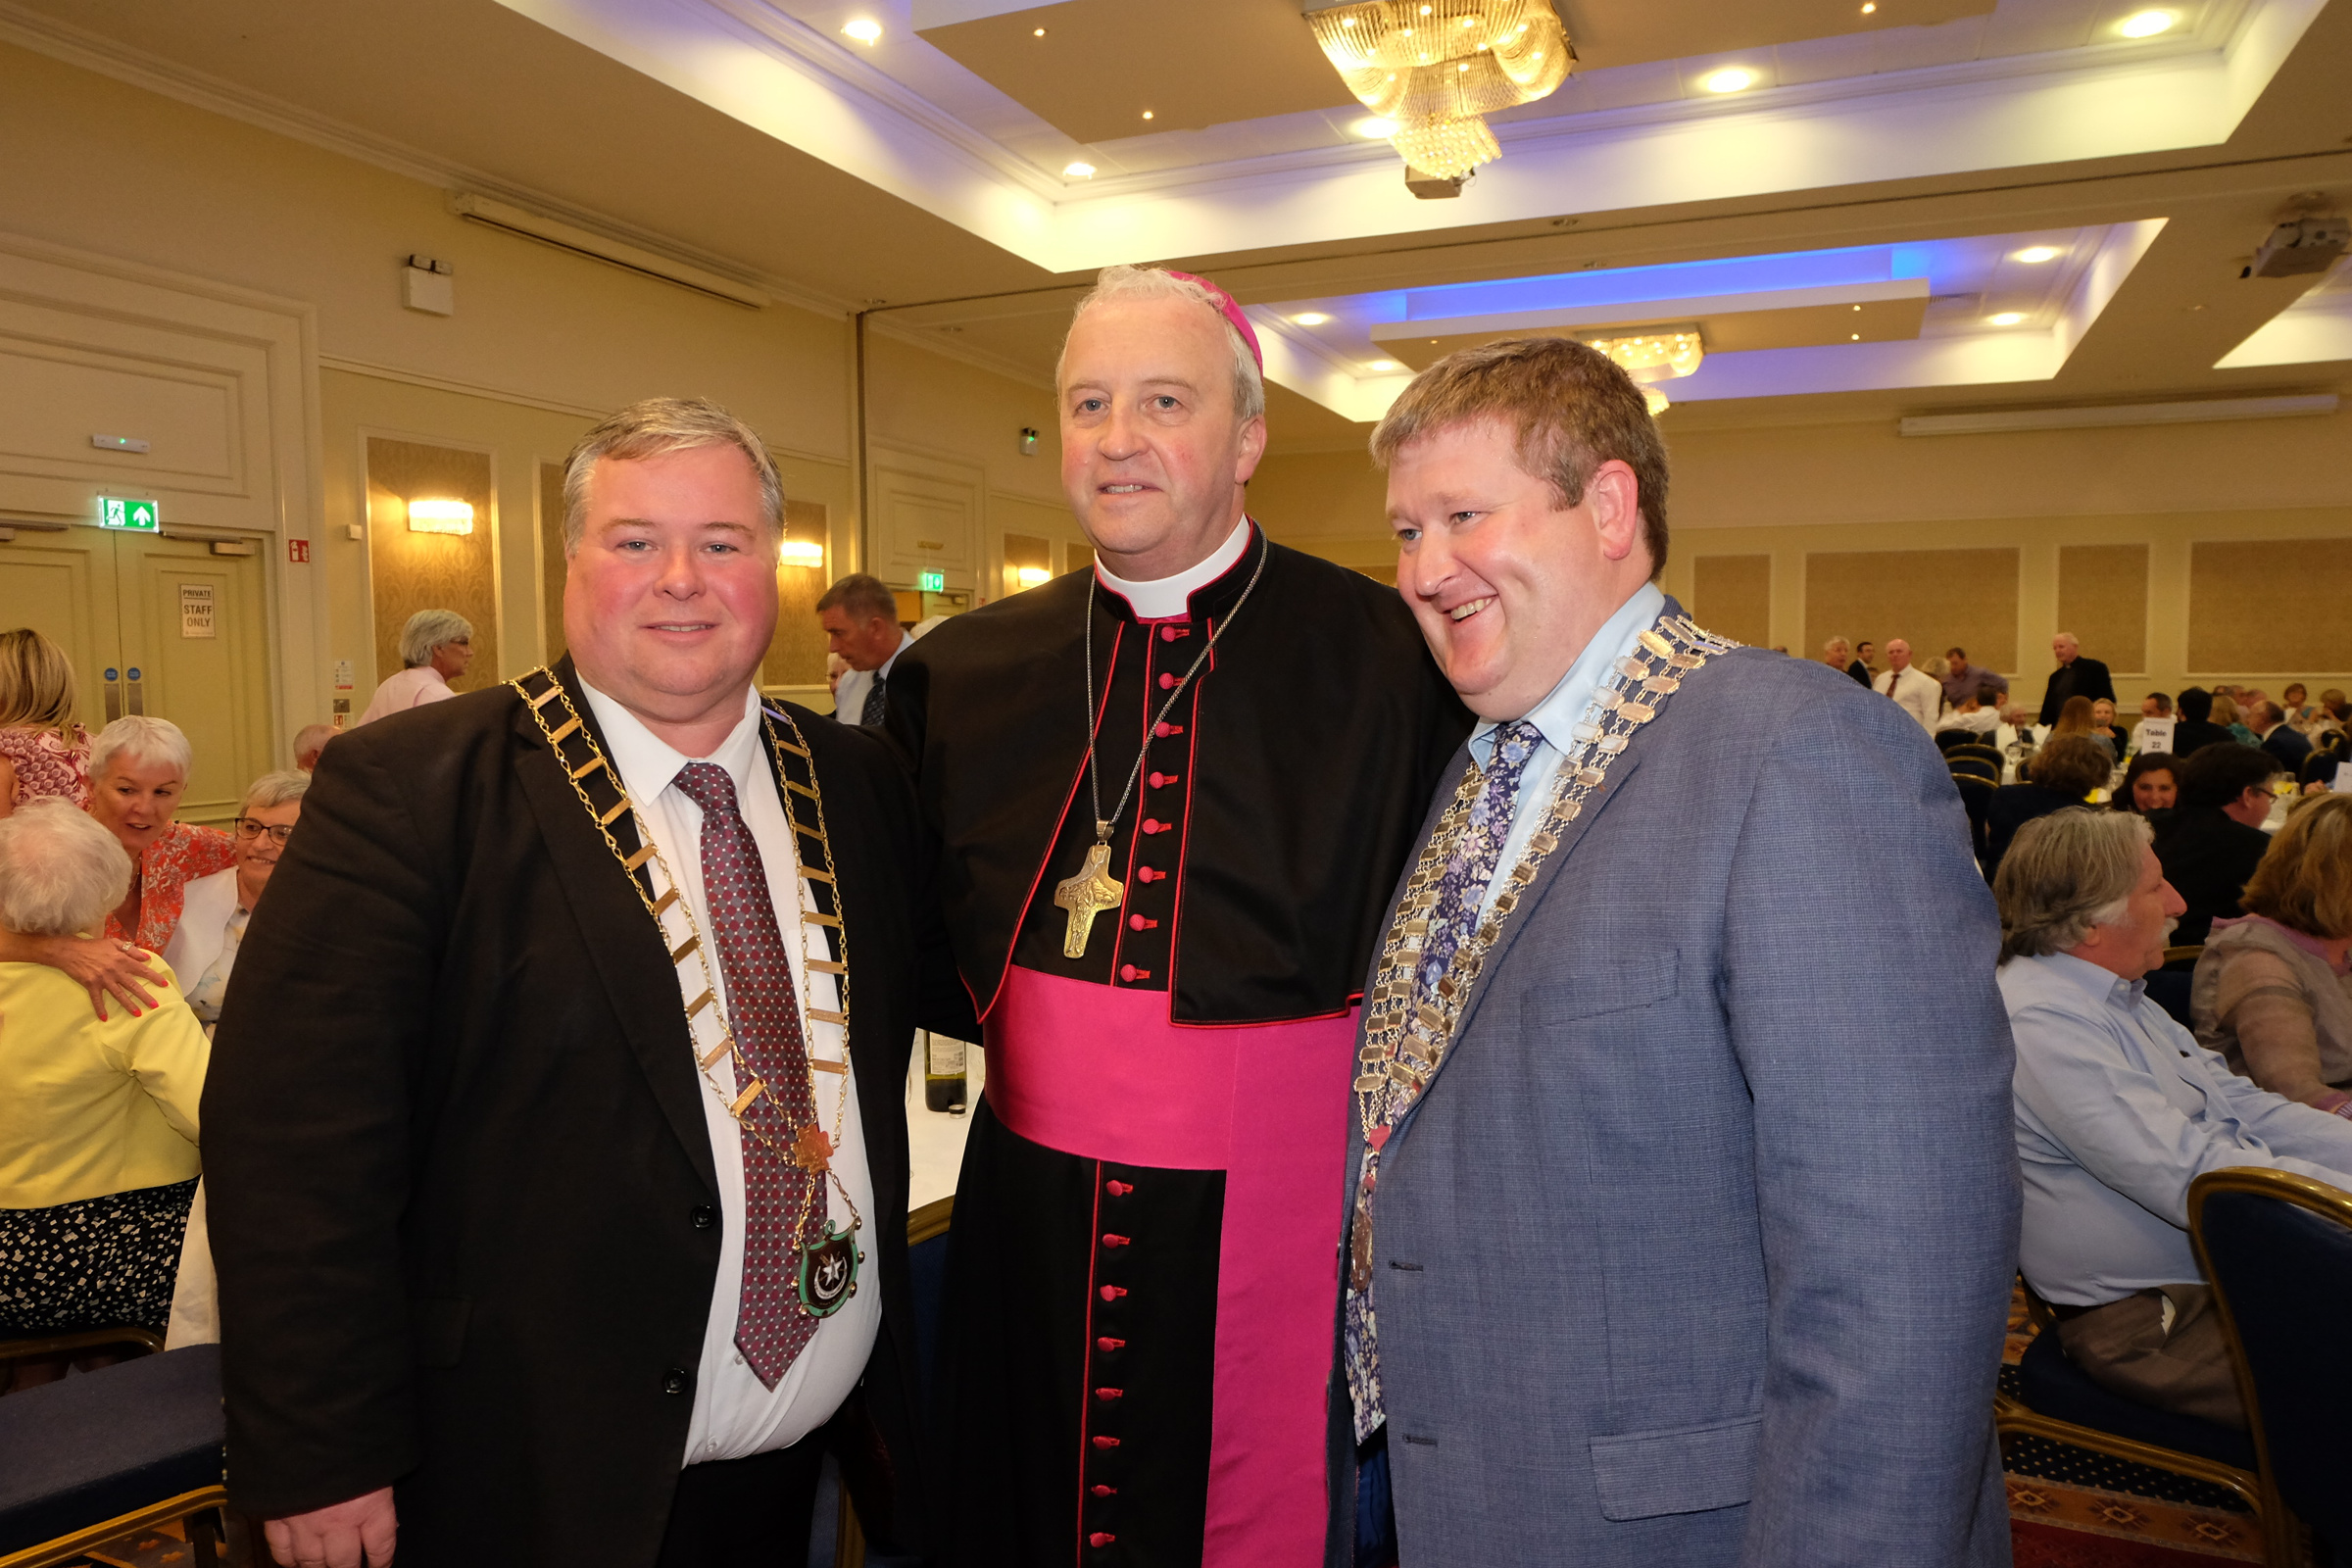 Mayor of Drogheda, Paul Bell and Shane P.O'Reilly with the new Bishop Michael Router at a celebration dinner following the Bishop's Ordination Armagh City Hotel, Armagh,  21 July 2019Credit: LiamMcArdle.com